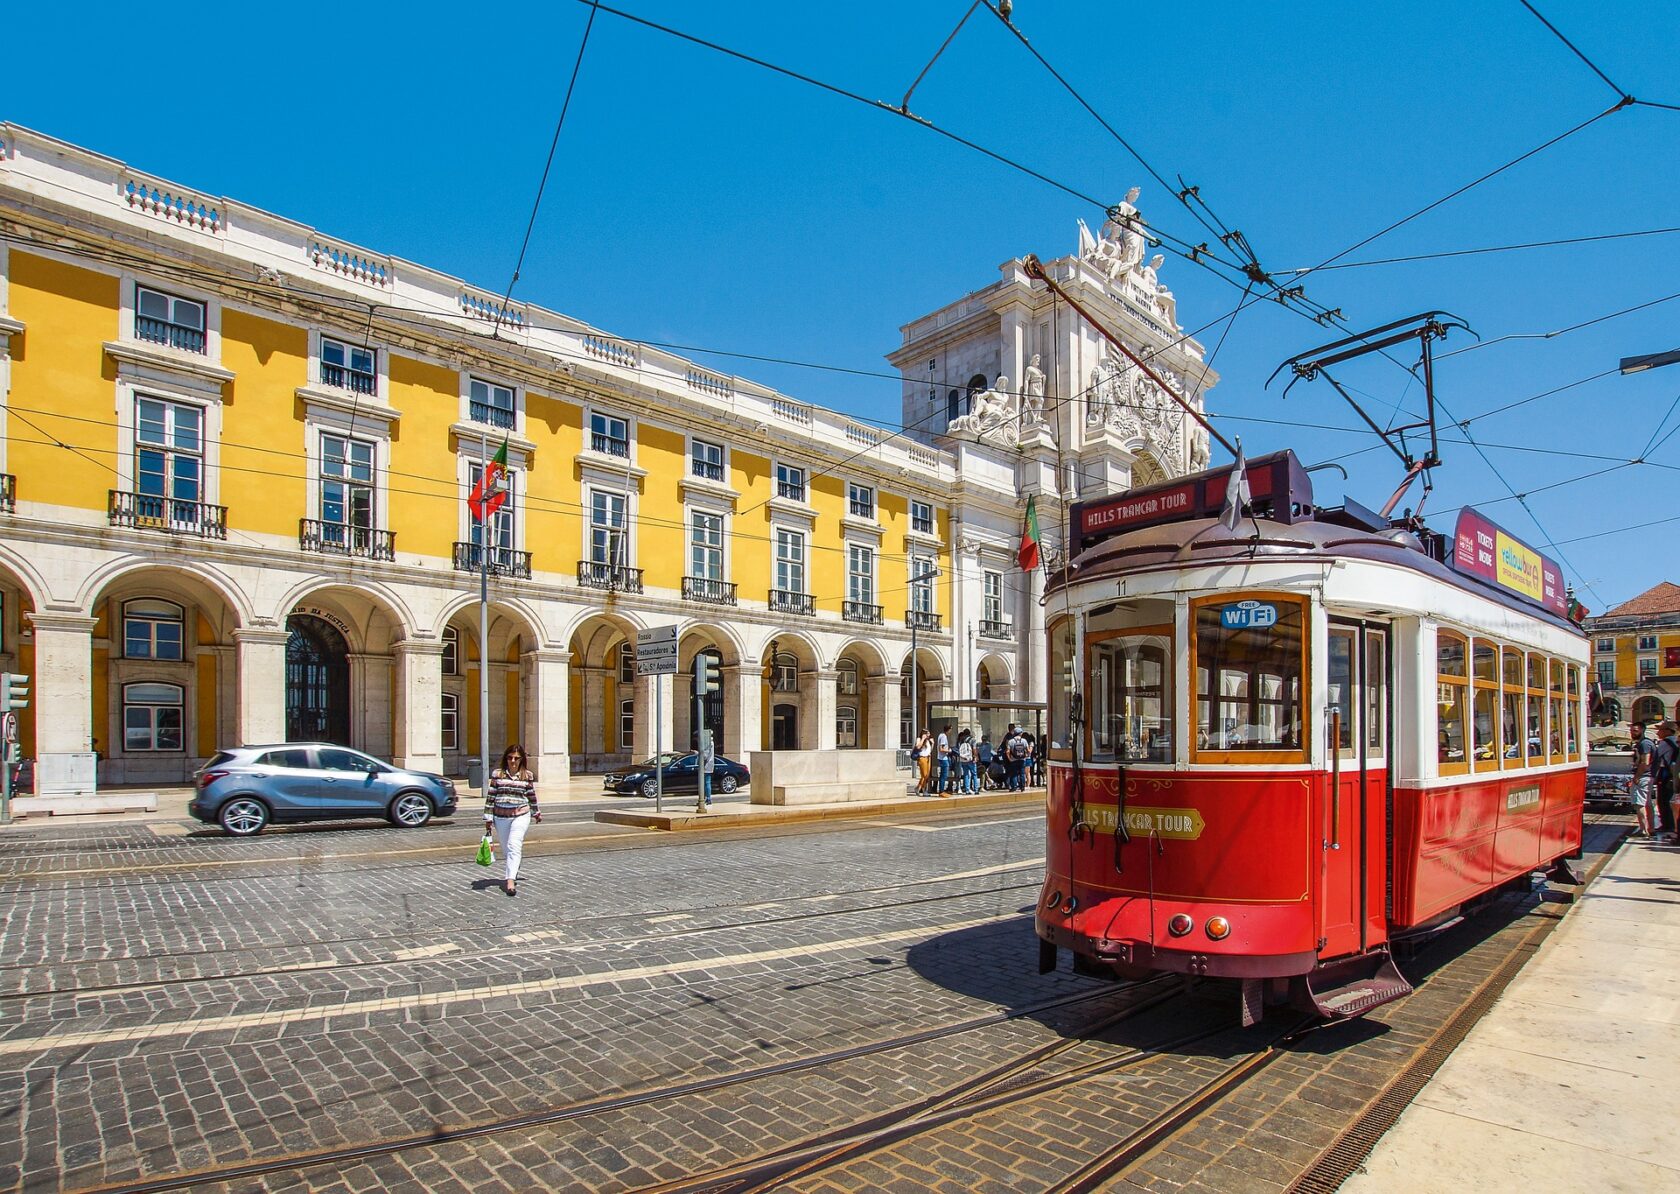 A tram and building in Lisbon, Portgual (an Atlantis site).